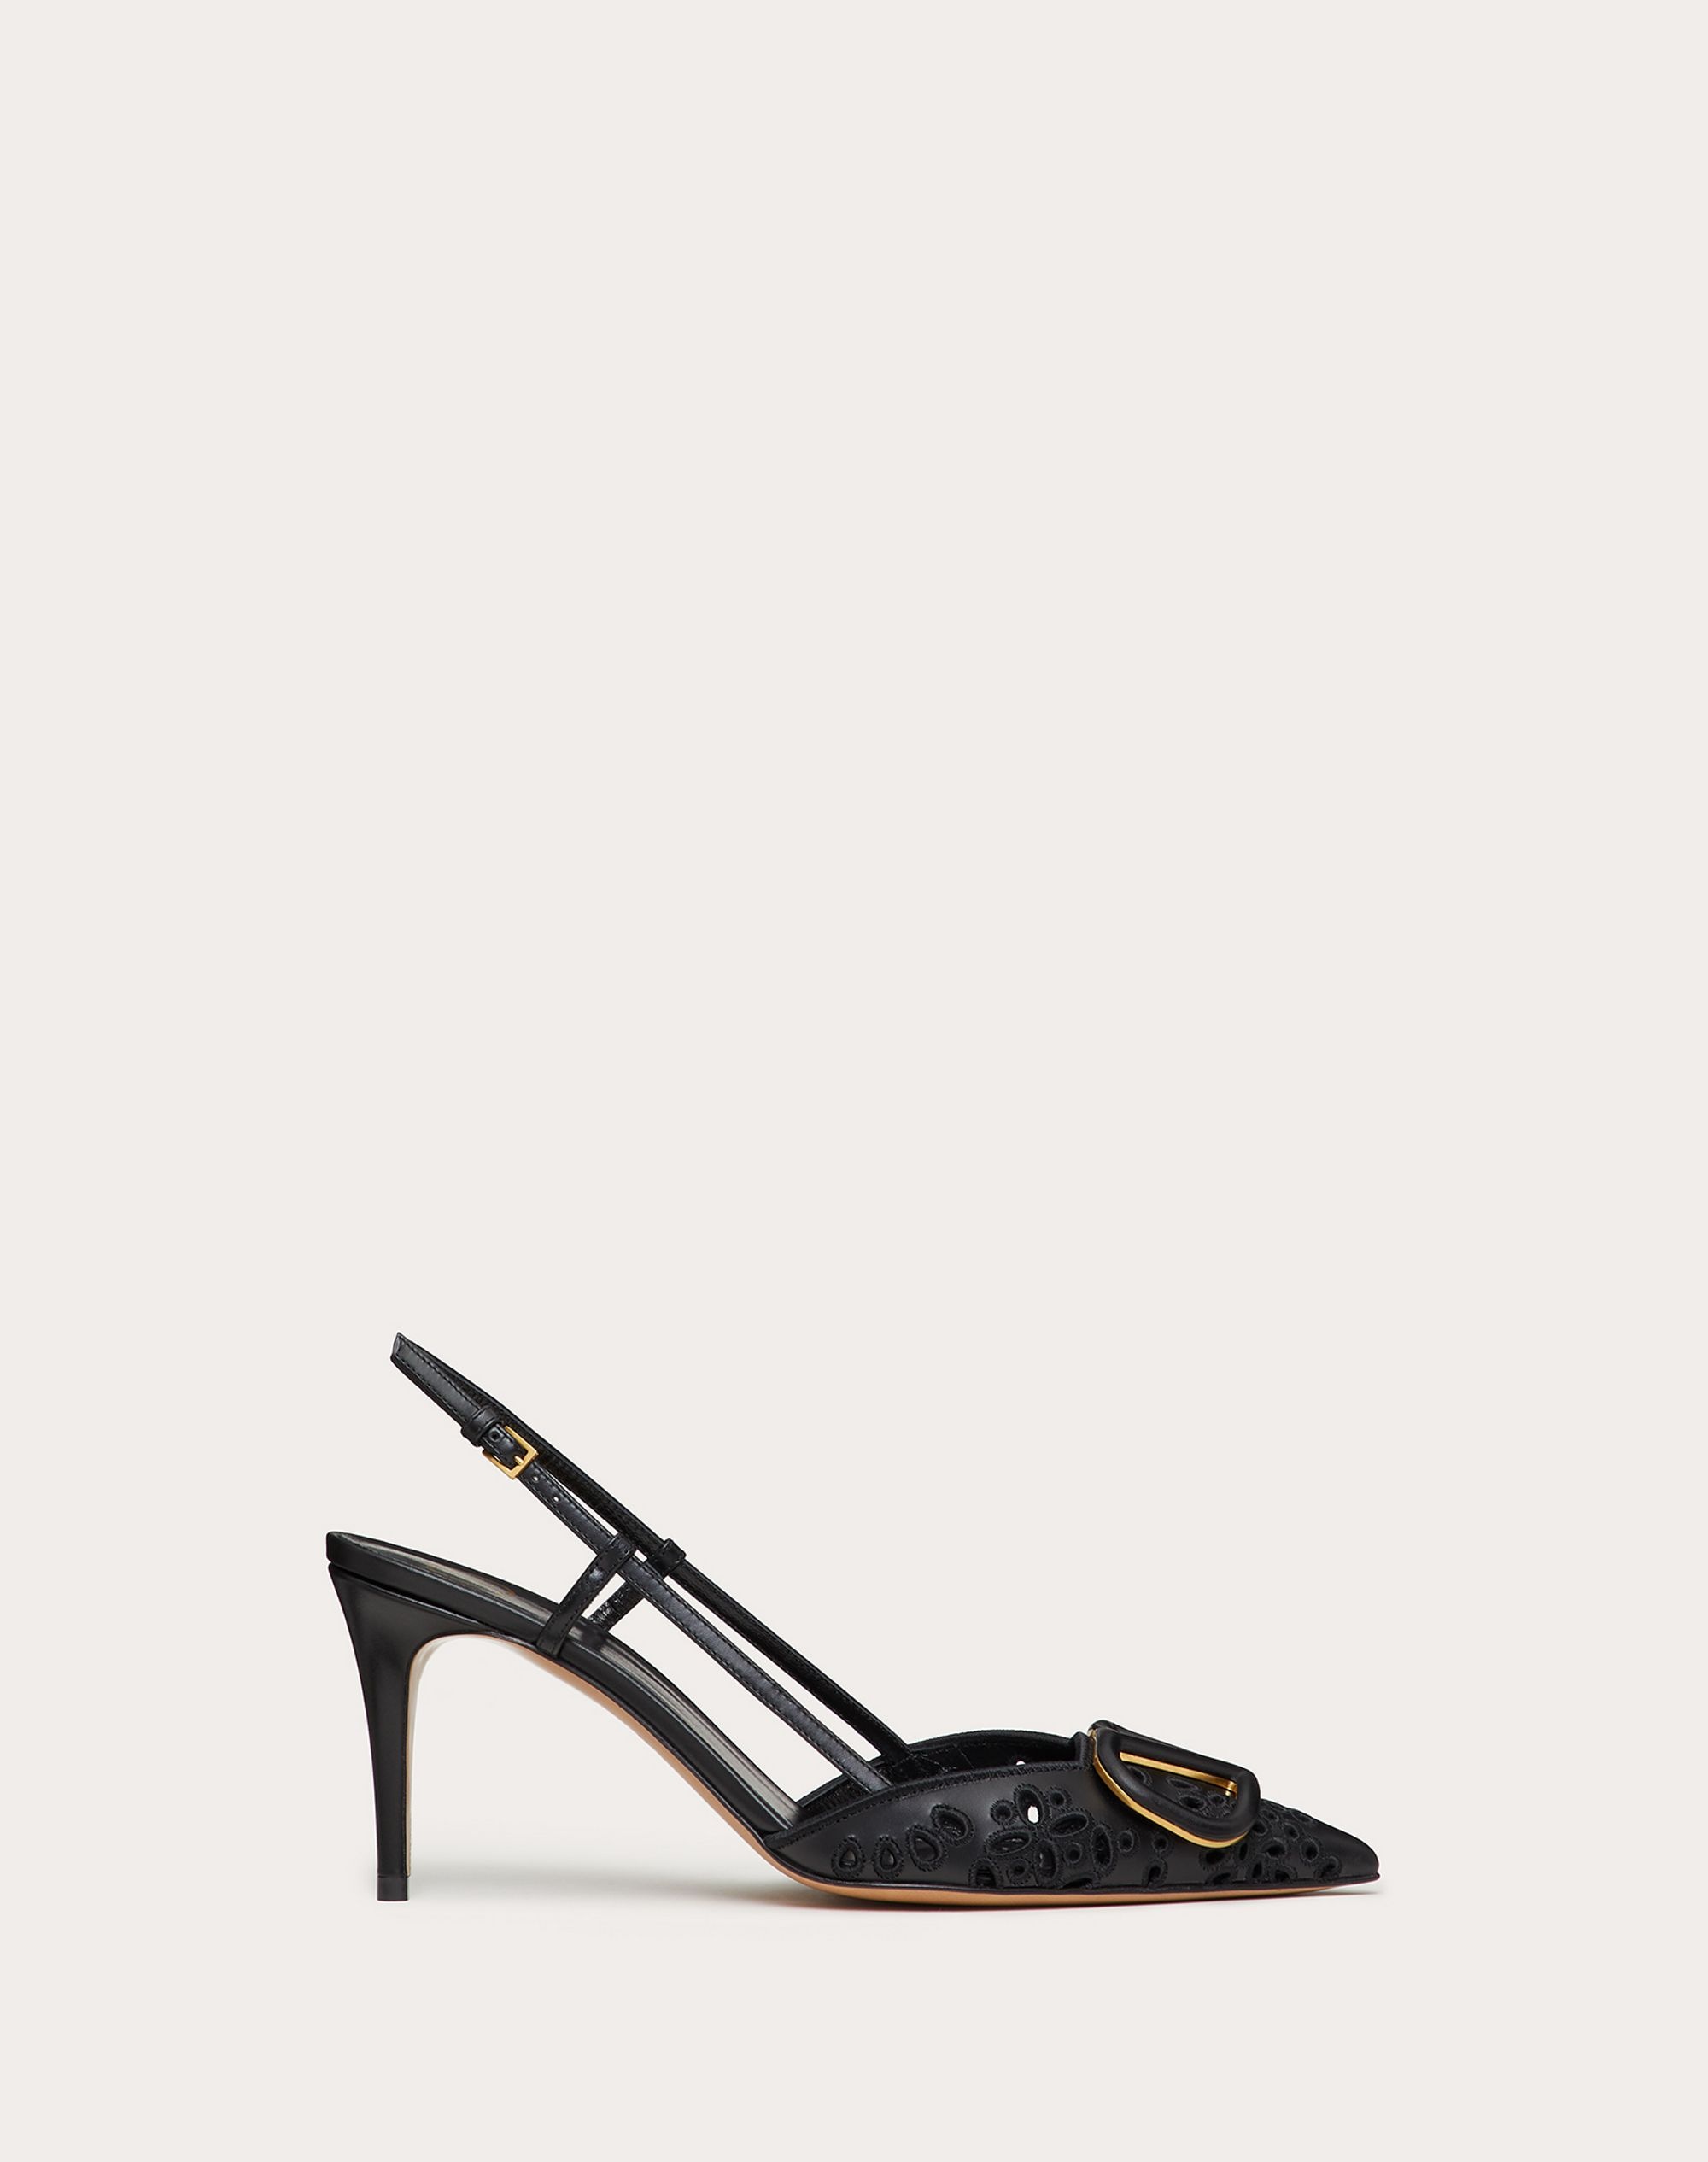 VLOGO SIGNATURE CALFSKIN SLINGBACK PUMP WITH SAN GALLO EMBROIDERY 80 MM - 1